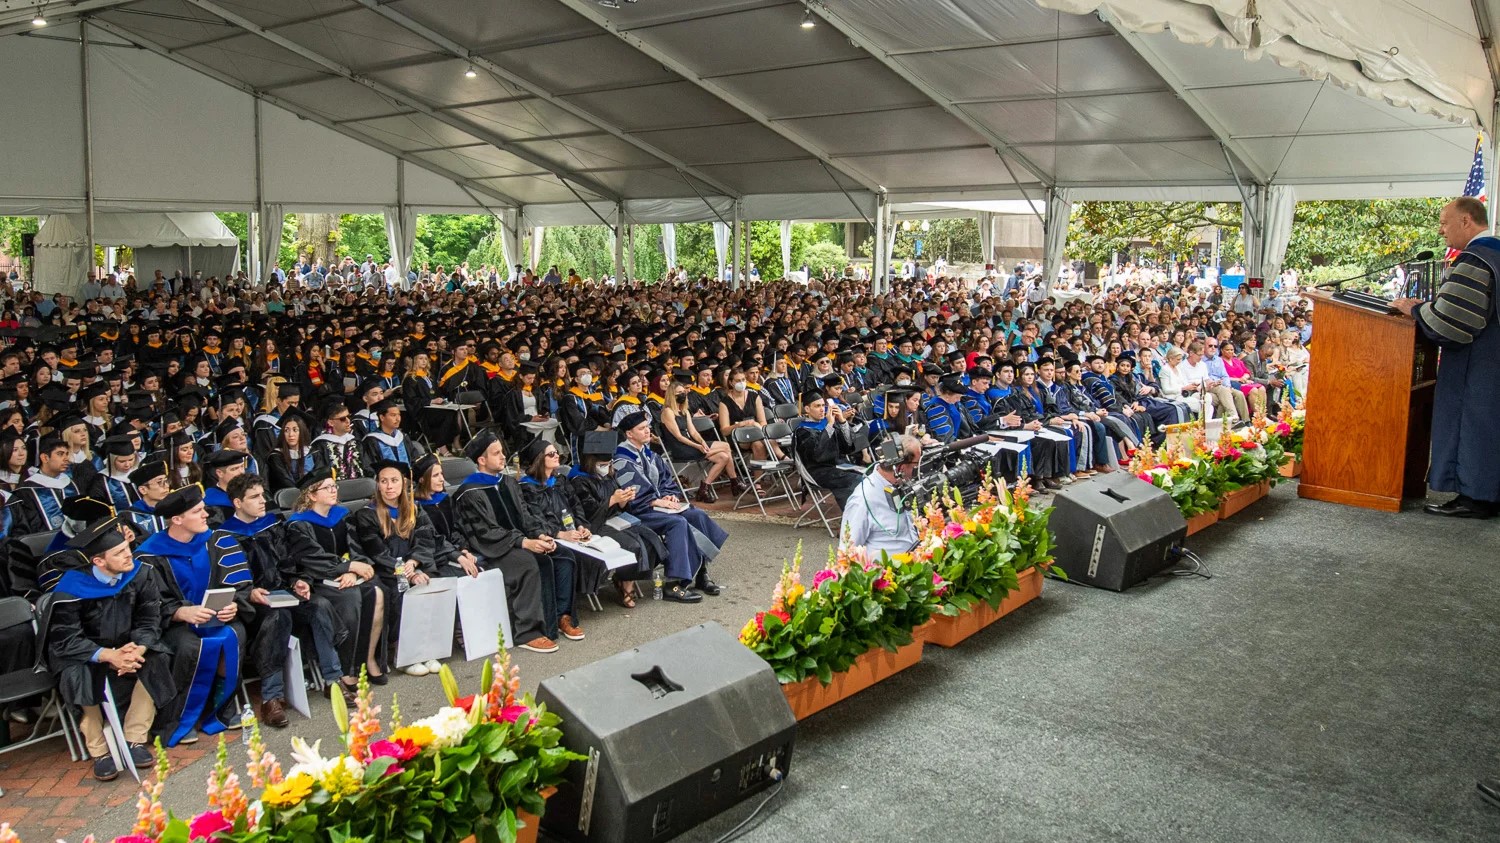 Graduate students gather in a large tent for commencement